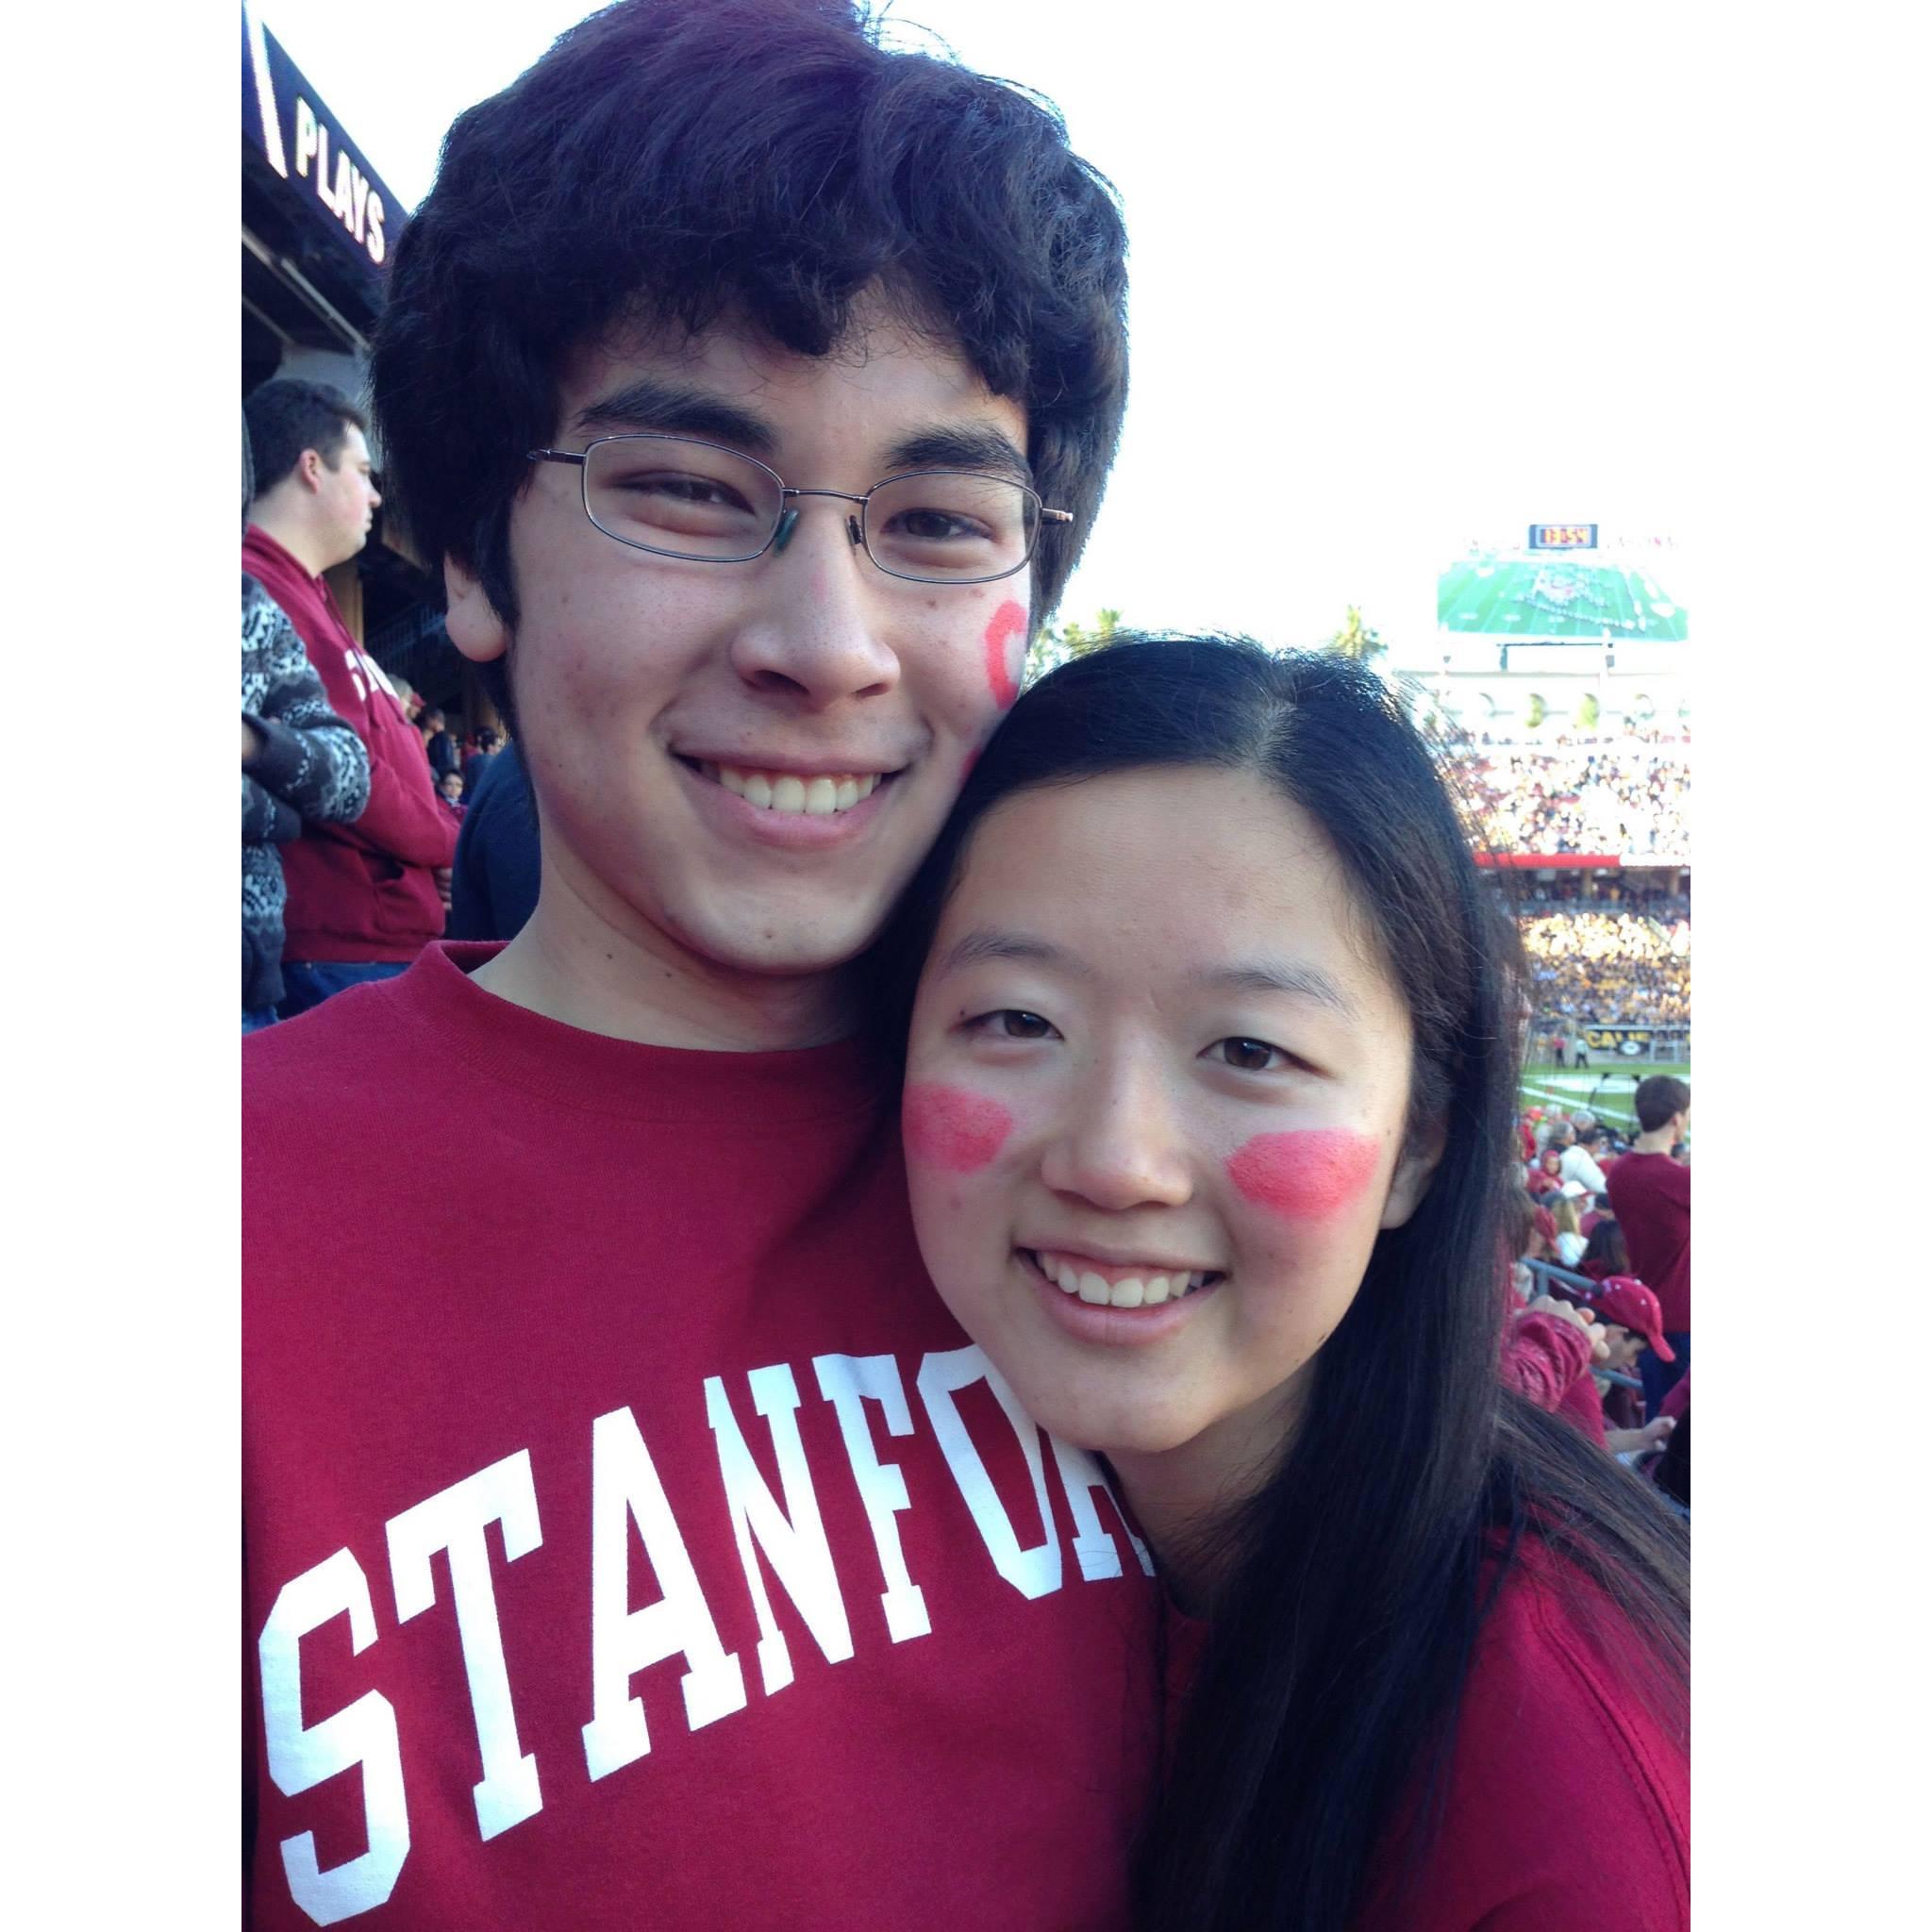 Attending a Stanford football game together (2013)